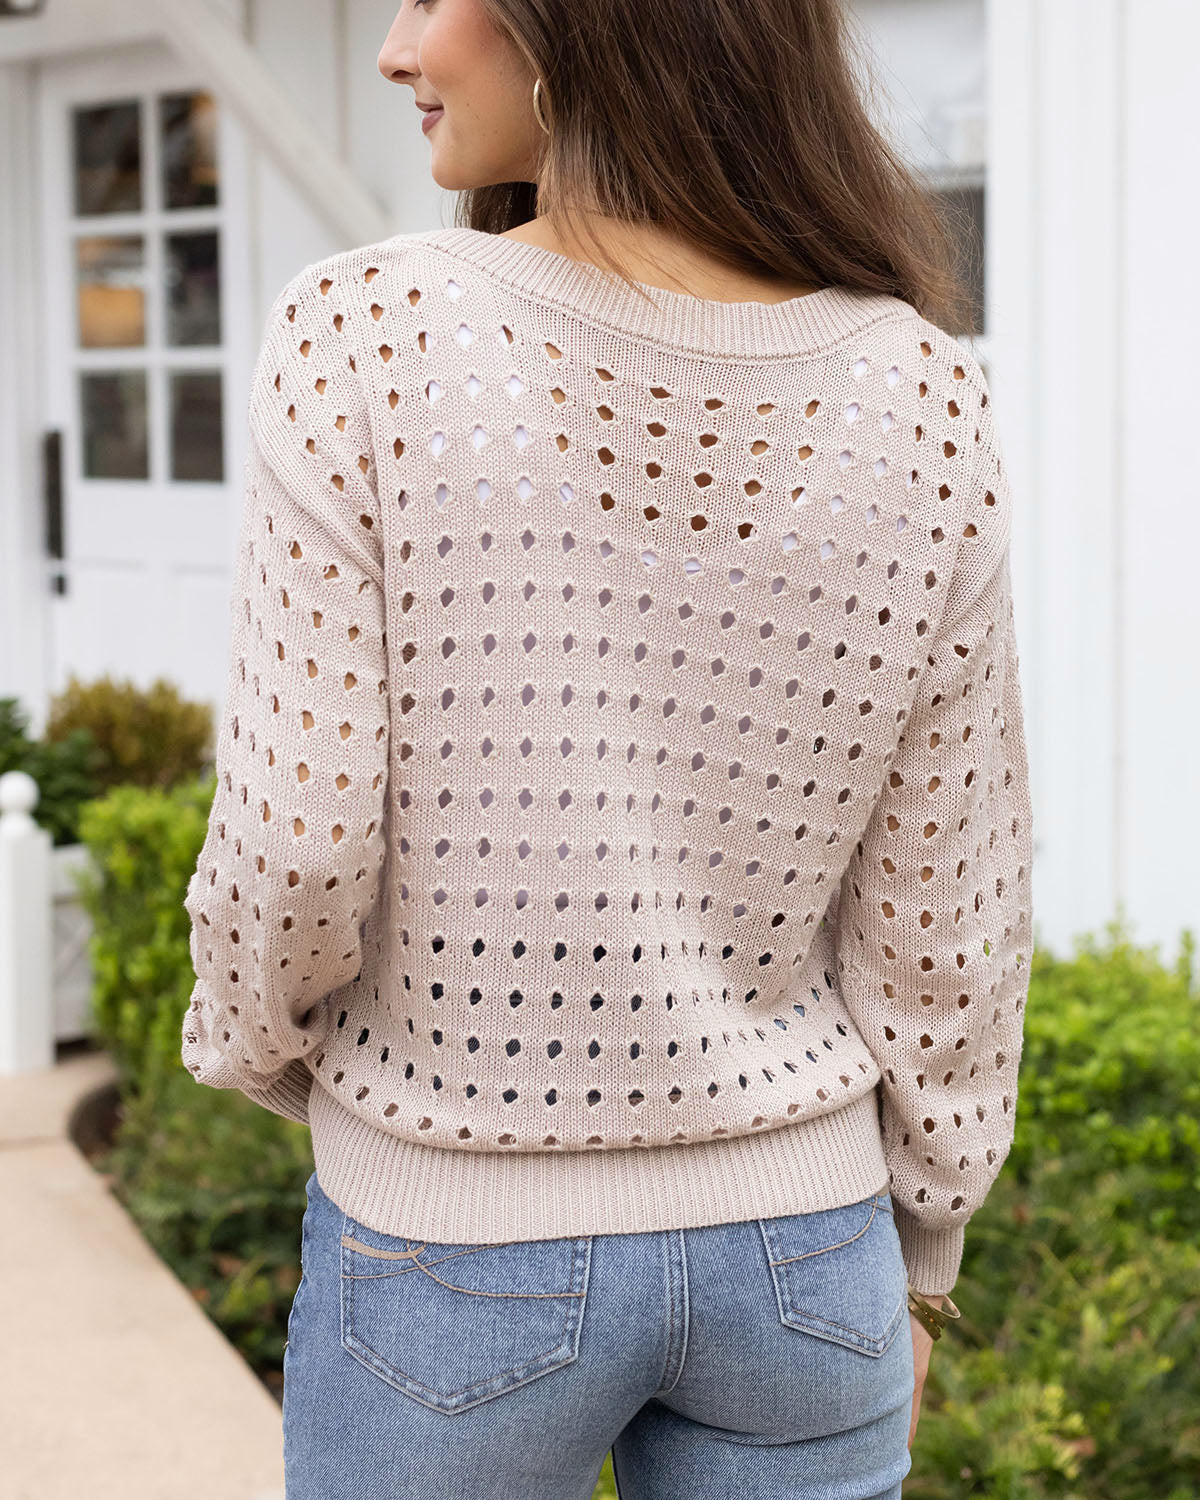 Grace and Lace - The Everyday Sweater is ready to be your